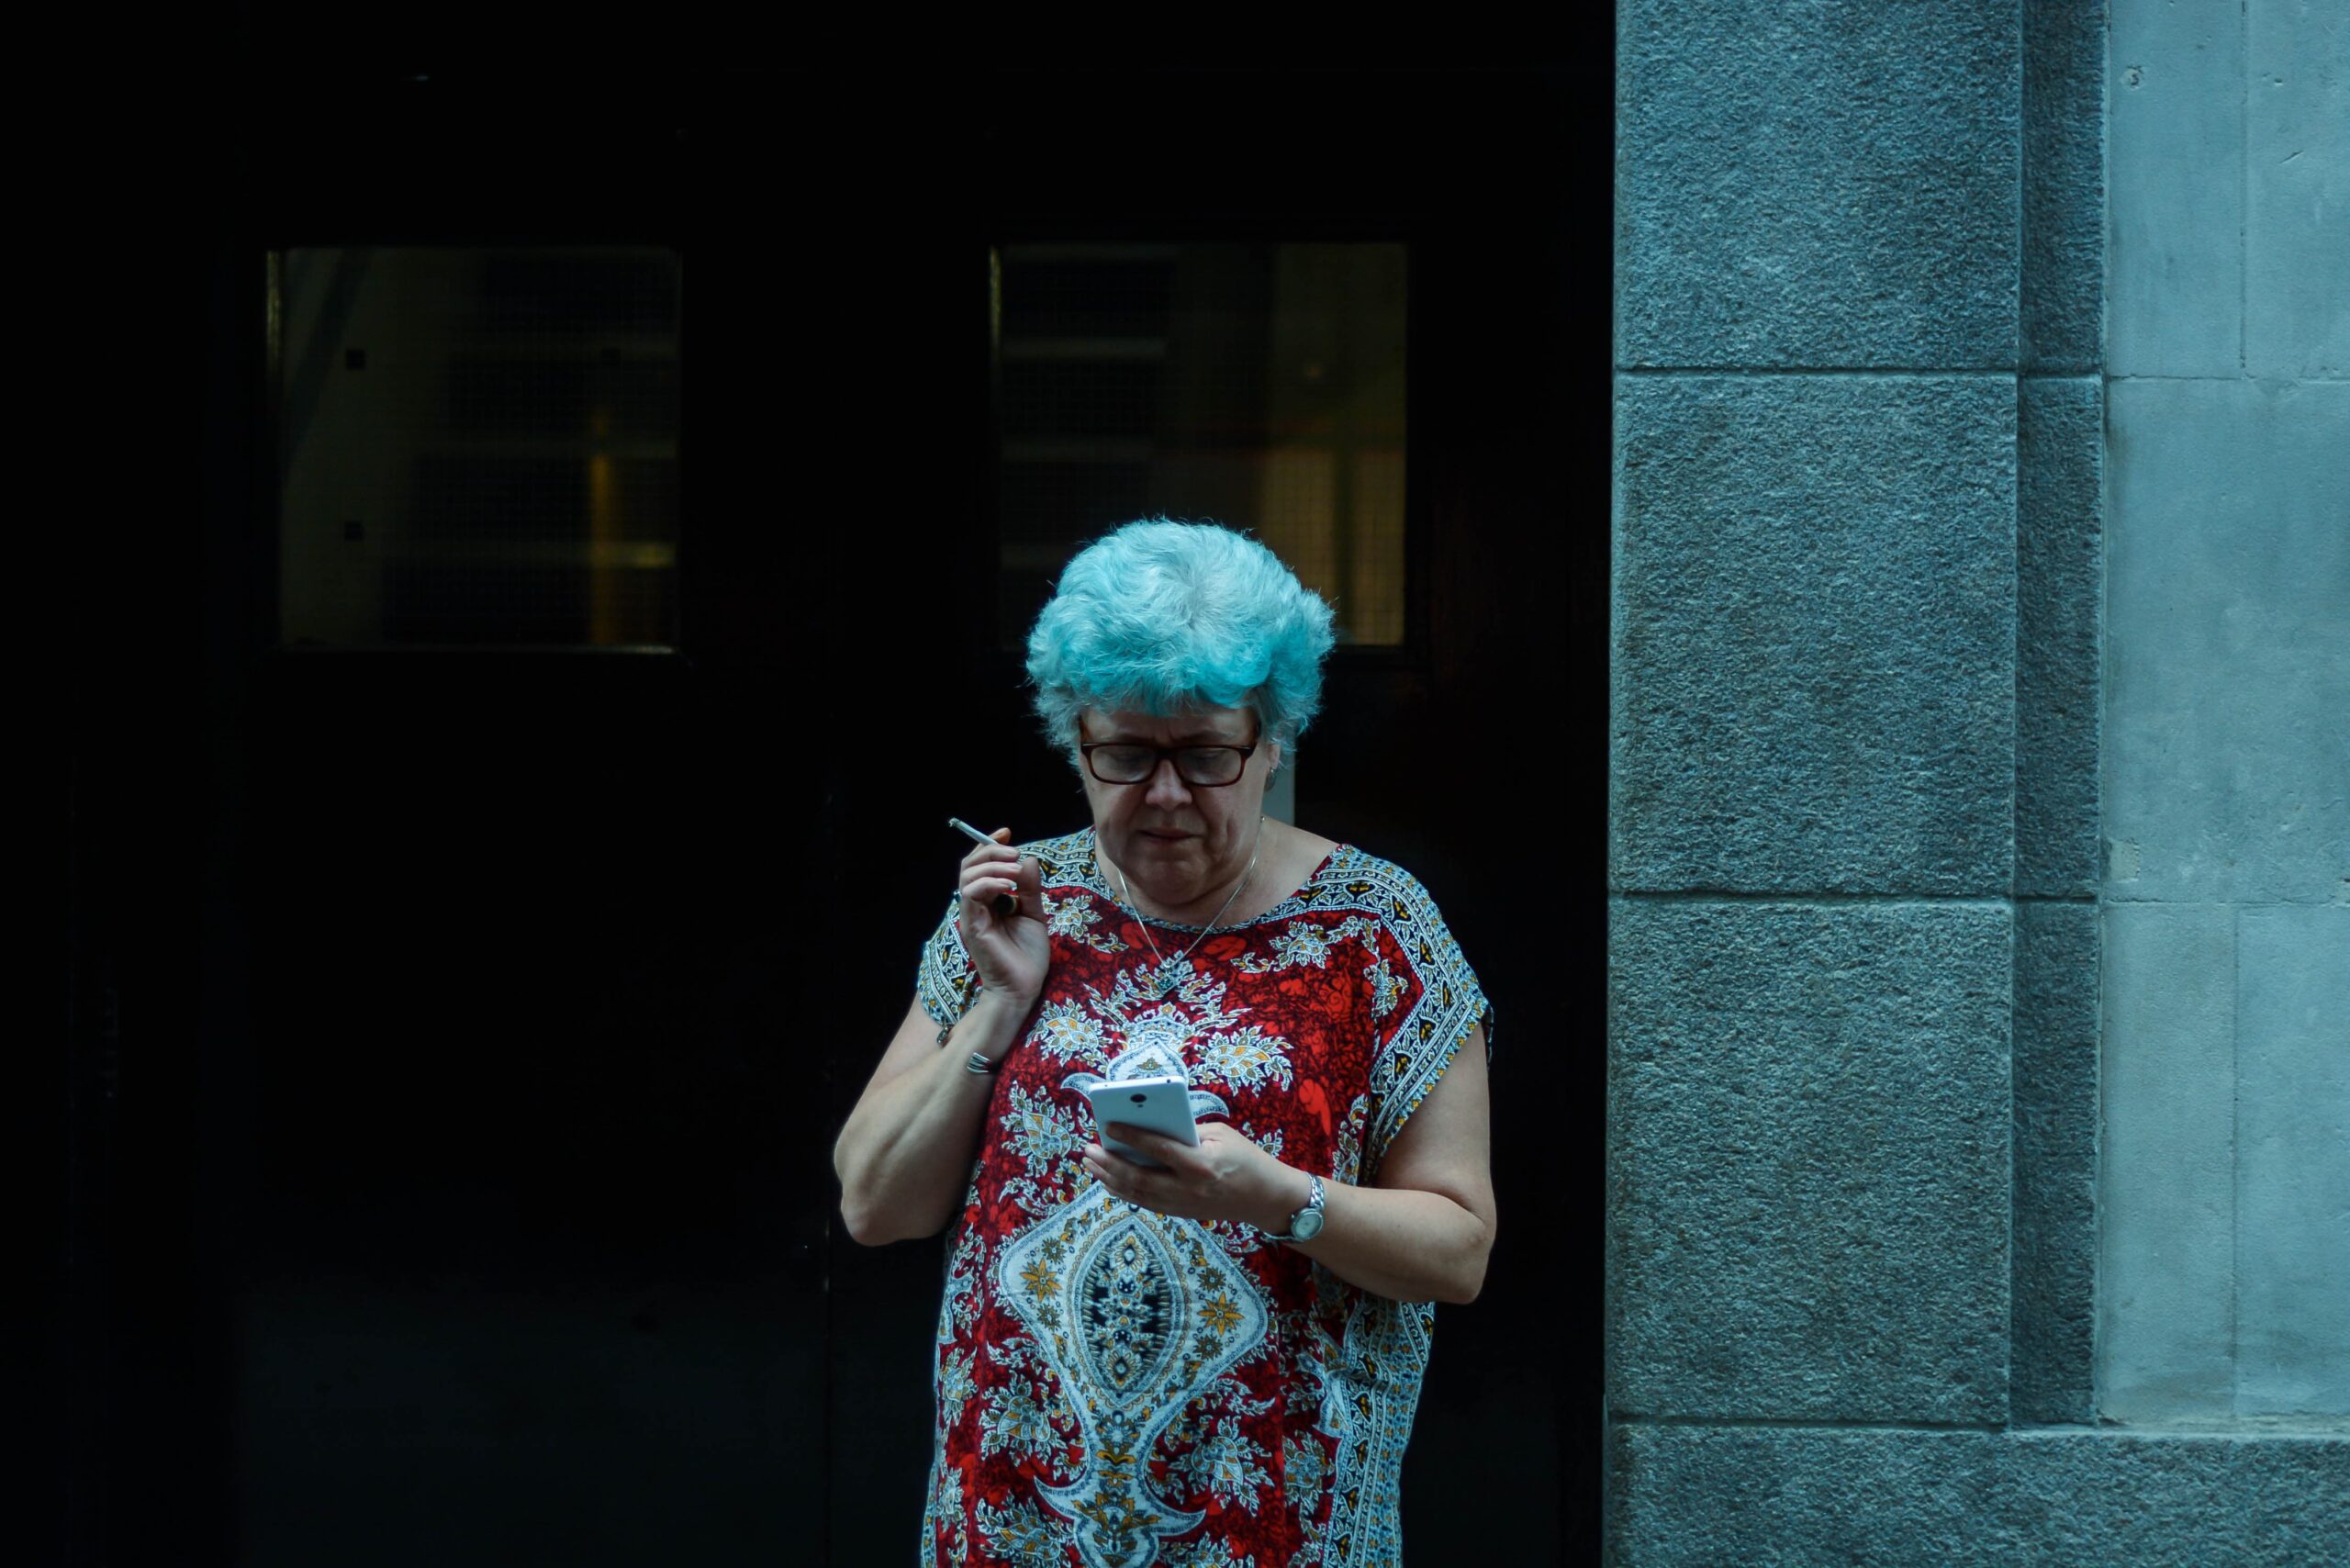 middle age woman smoes cigarette in london